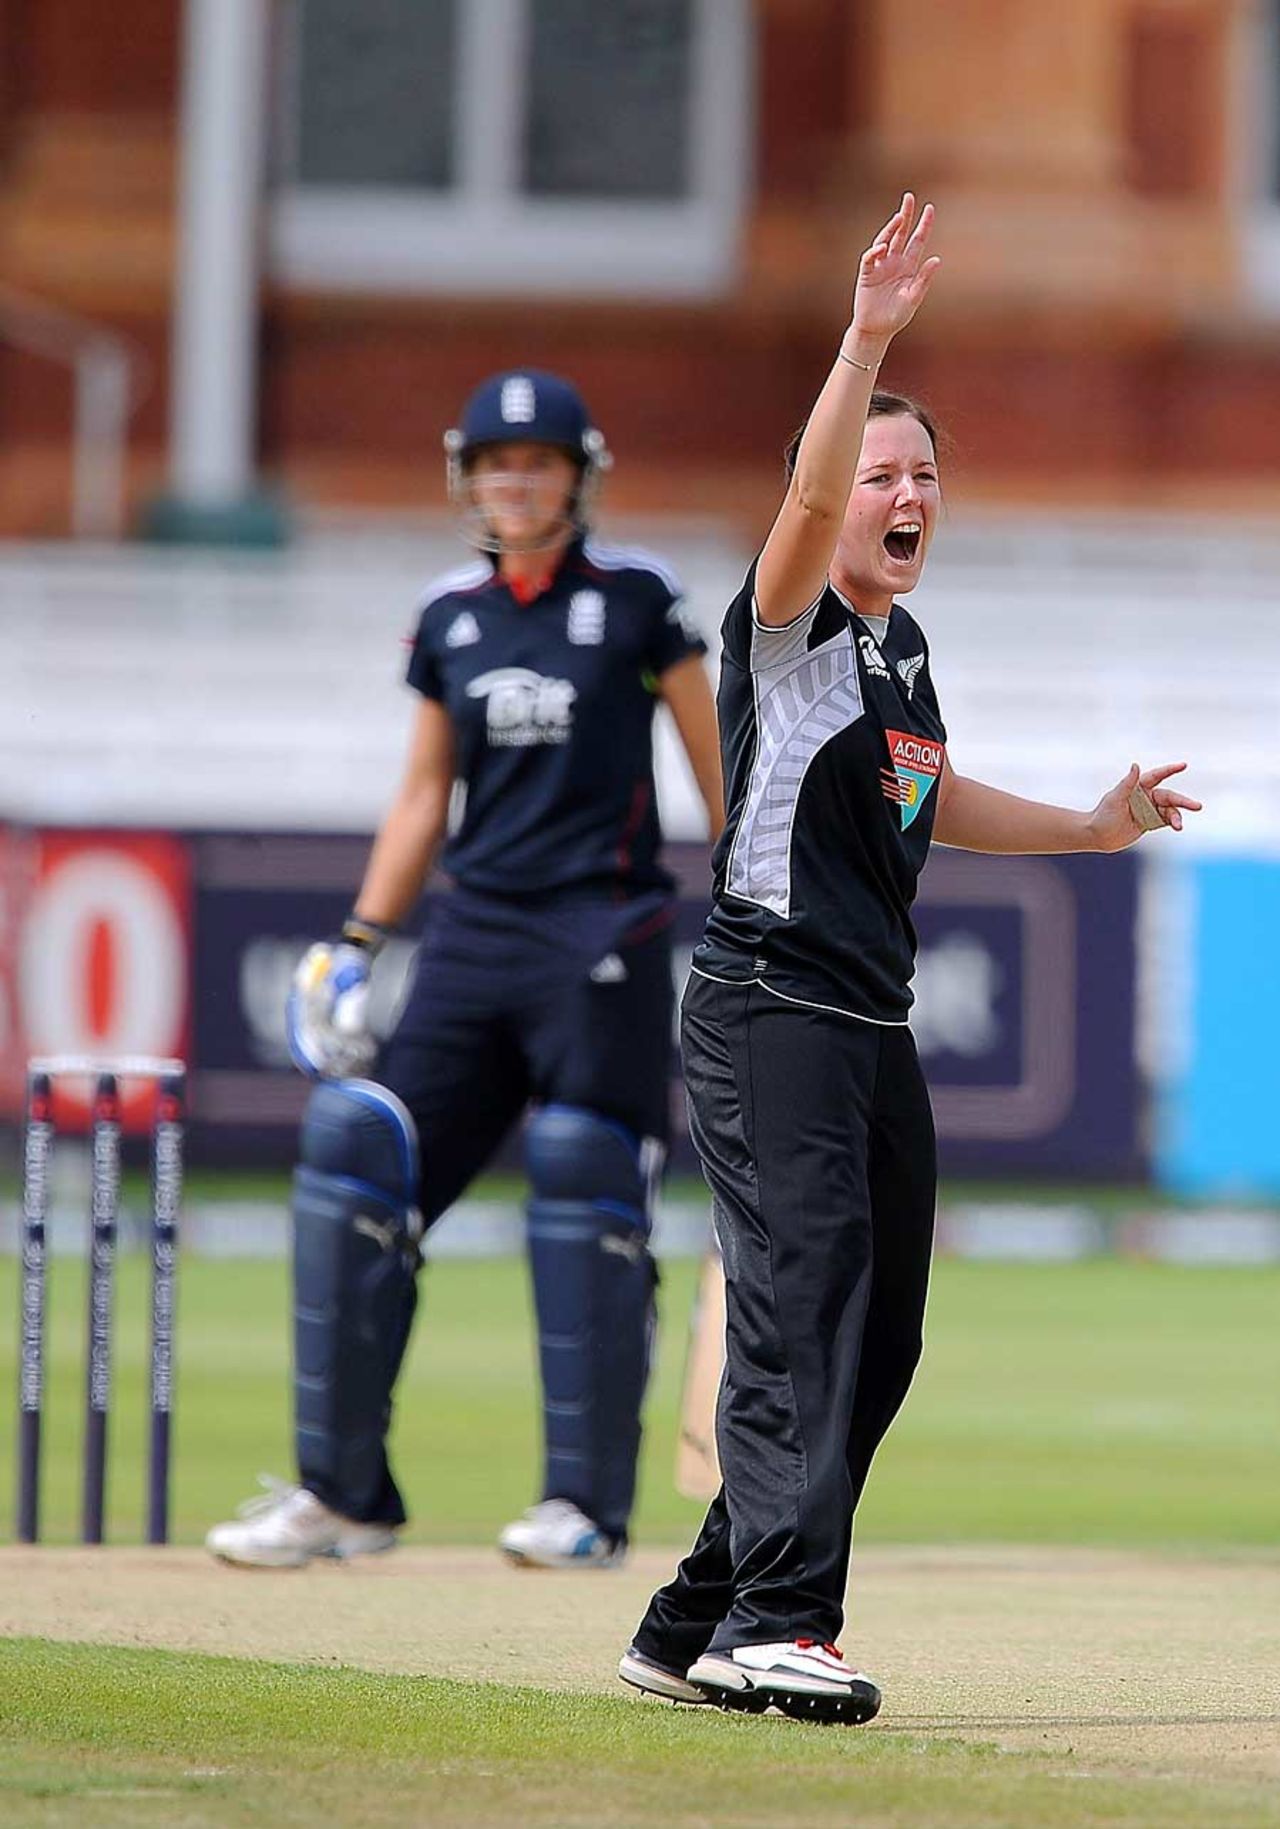 Erin Bermingham impressed with four wickets at Lord's, England Women v New Zealand Women, 5th ODI, Lord's, July 20, 2010